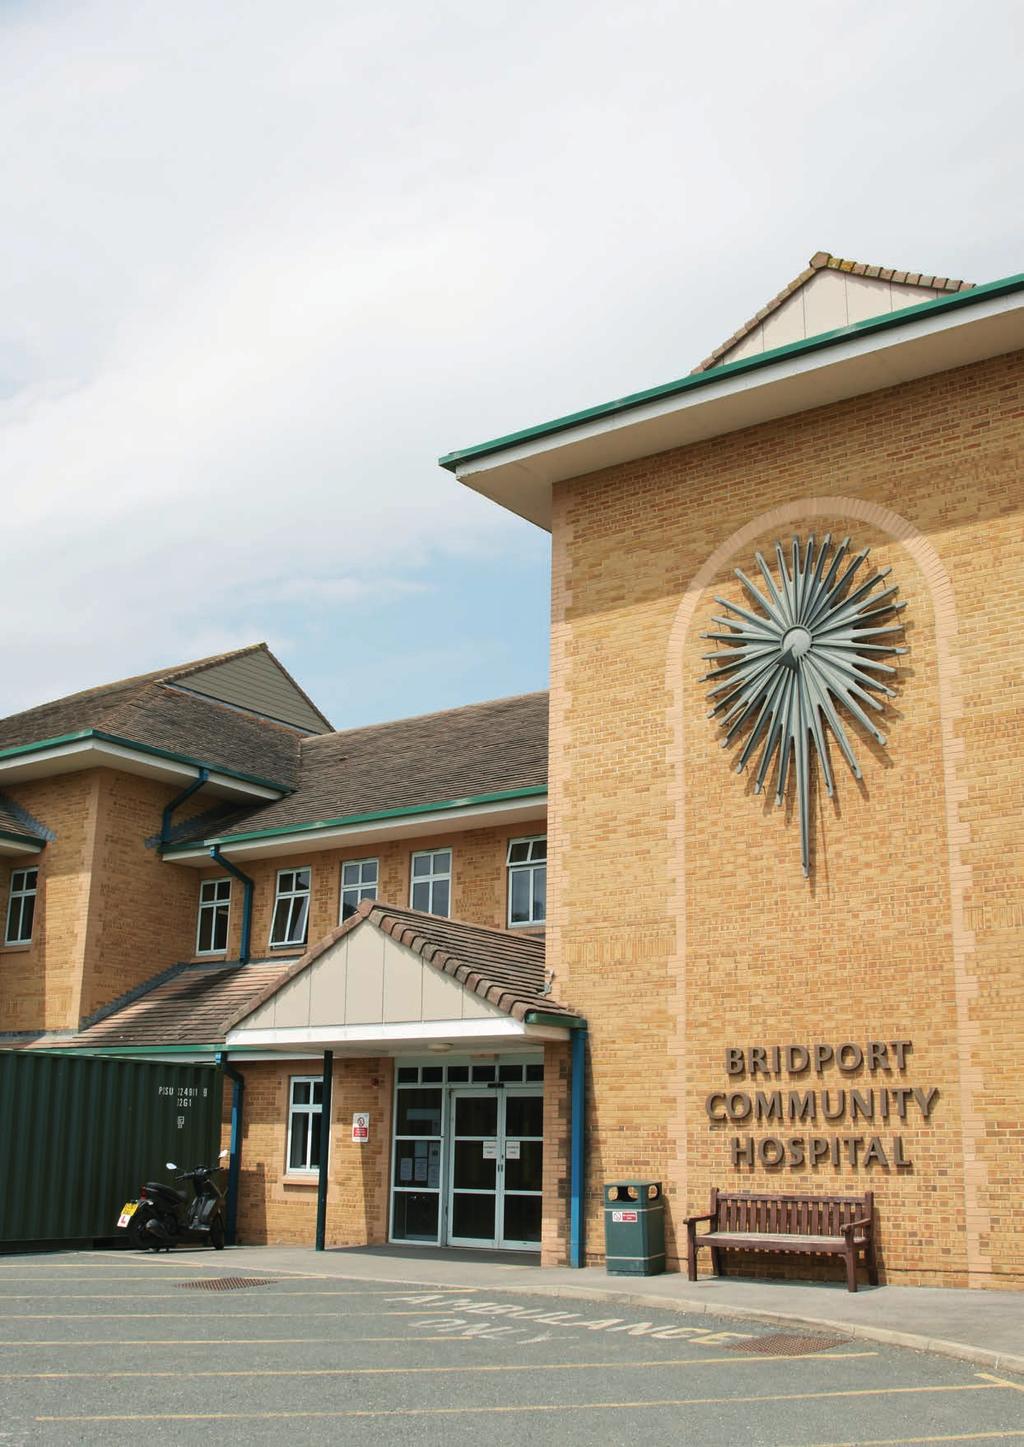 Bridport Community Hospital an example of mixed teams of professionals working closely together in a hub At Bridport Community Hospital we already have a mixed team of professionals,